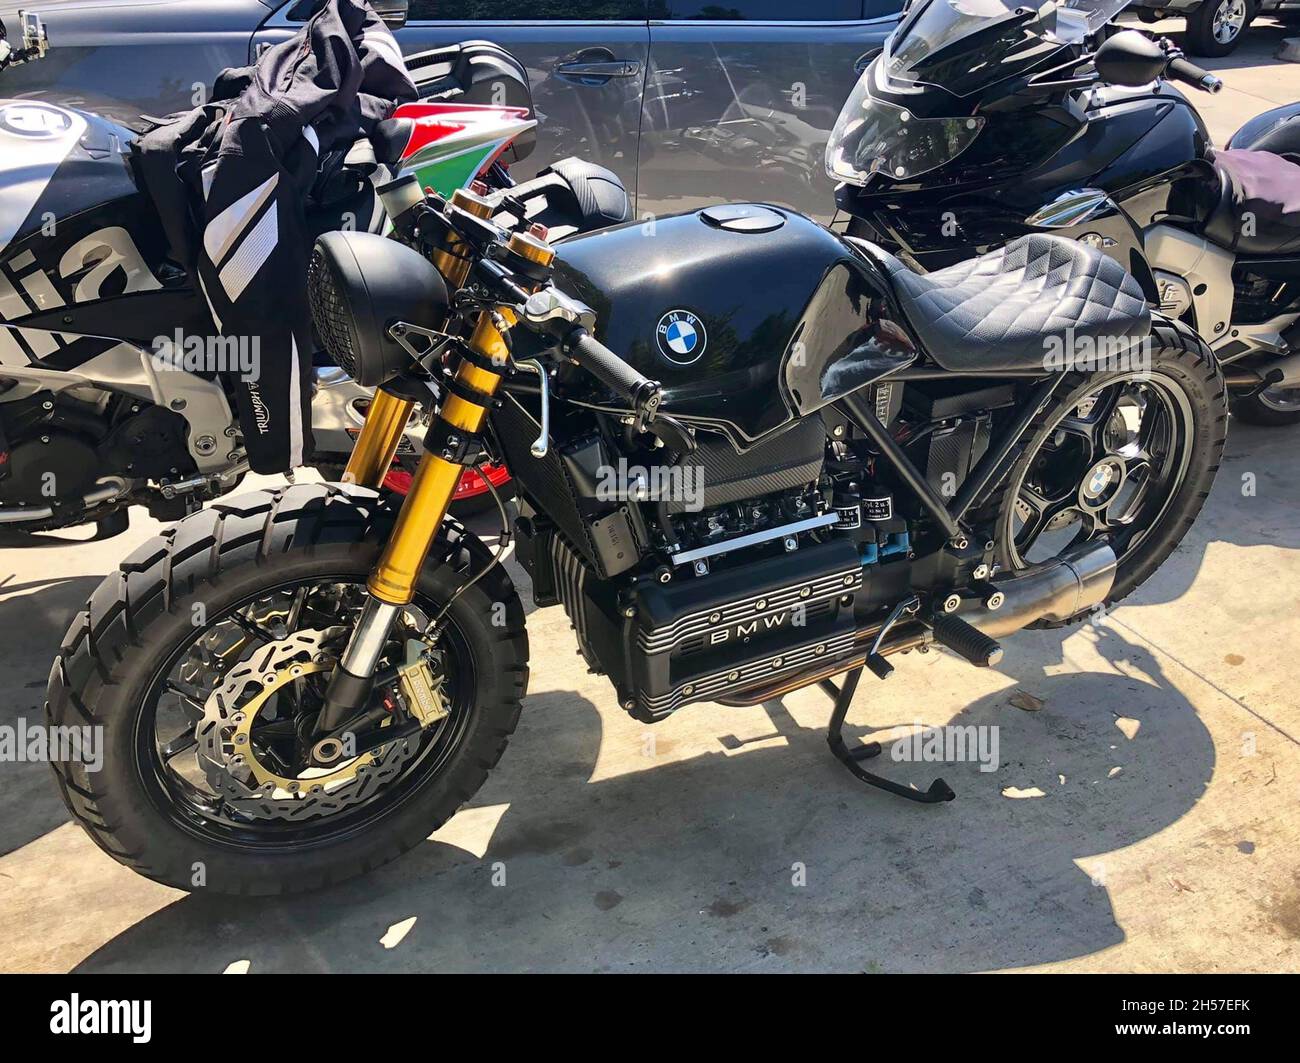 Old, customized BMW motorcycle . Parked next to other motorcycles. Los Angeles, United States. Stock Photo